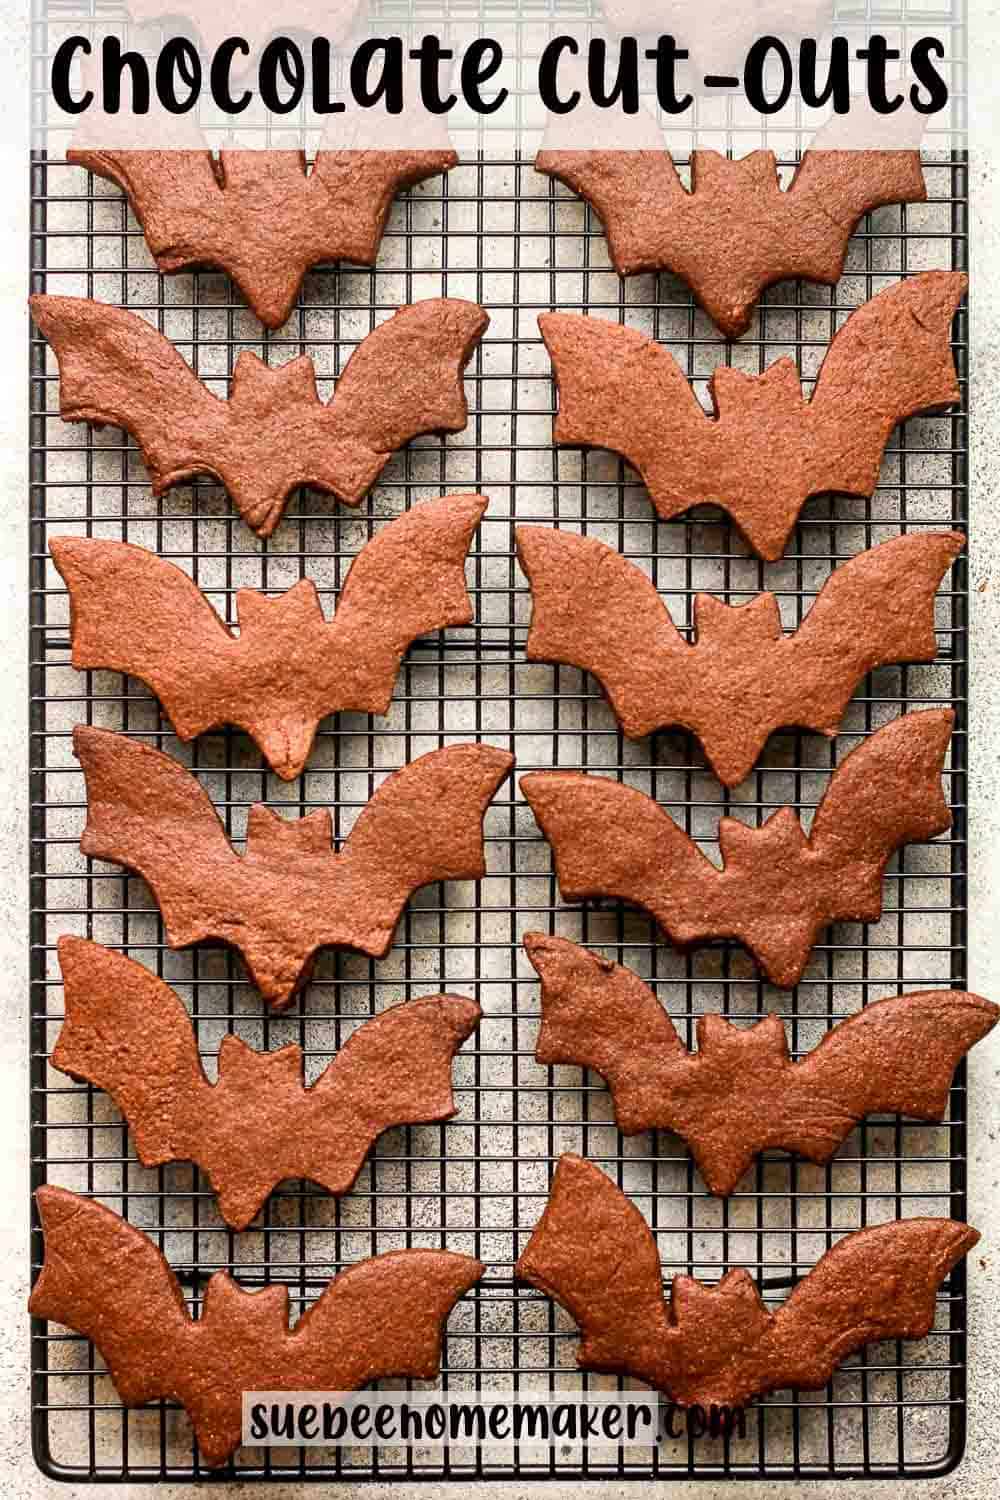 A wire rack of chocolate cut outs in bat shapes.